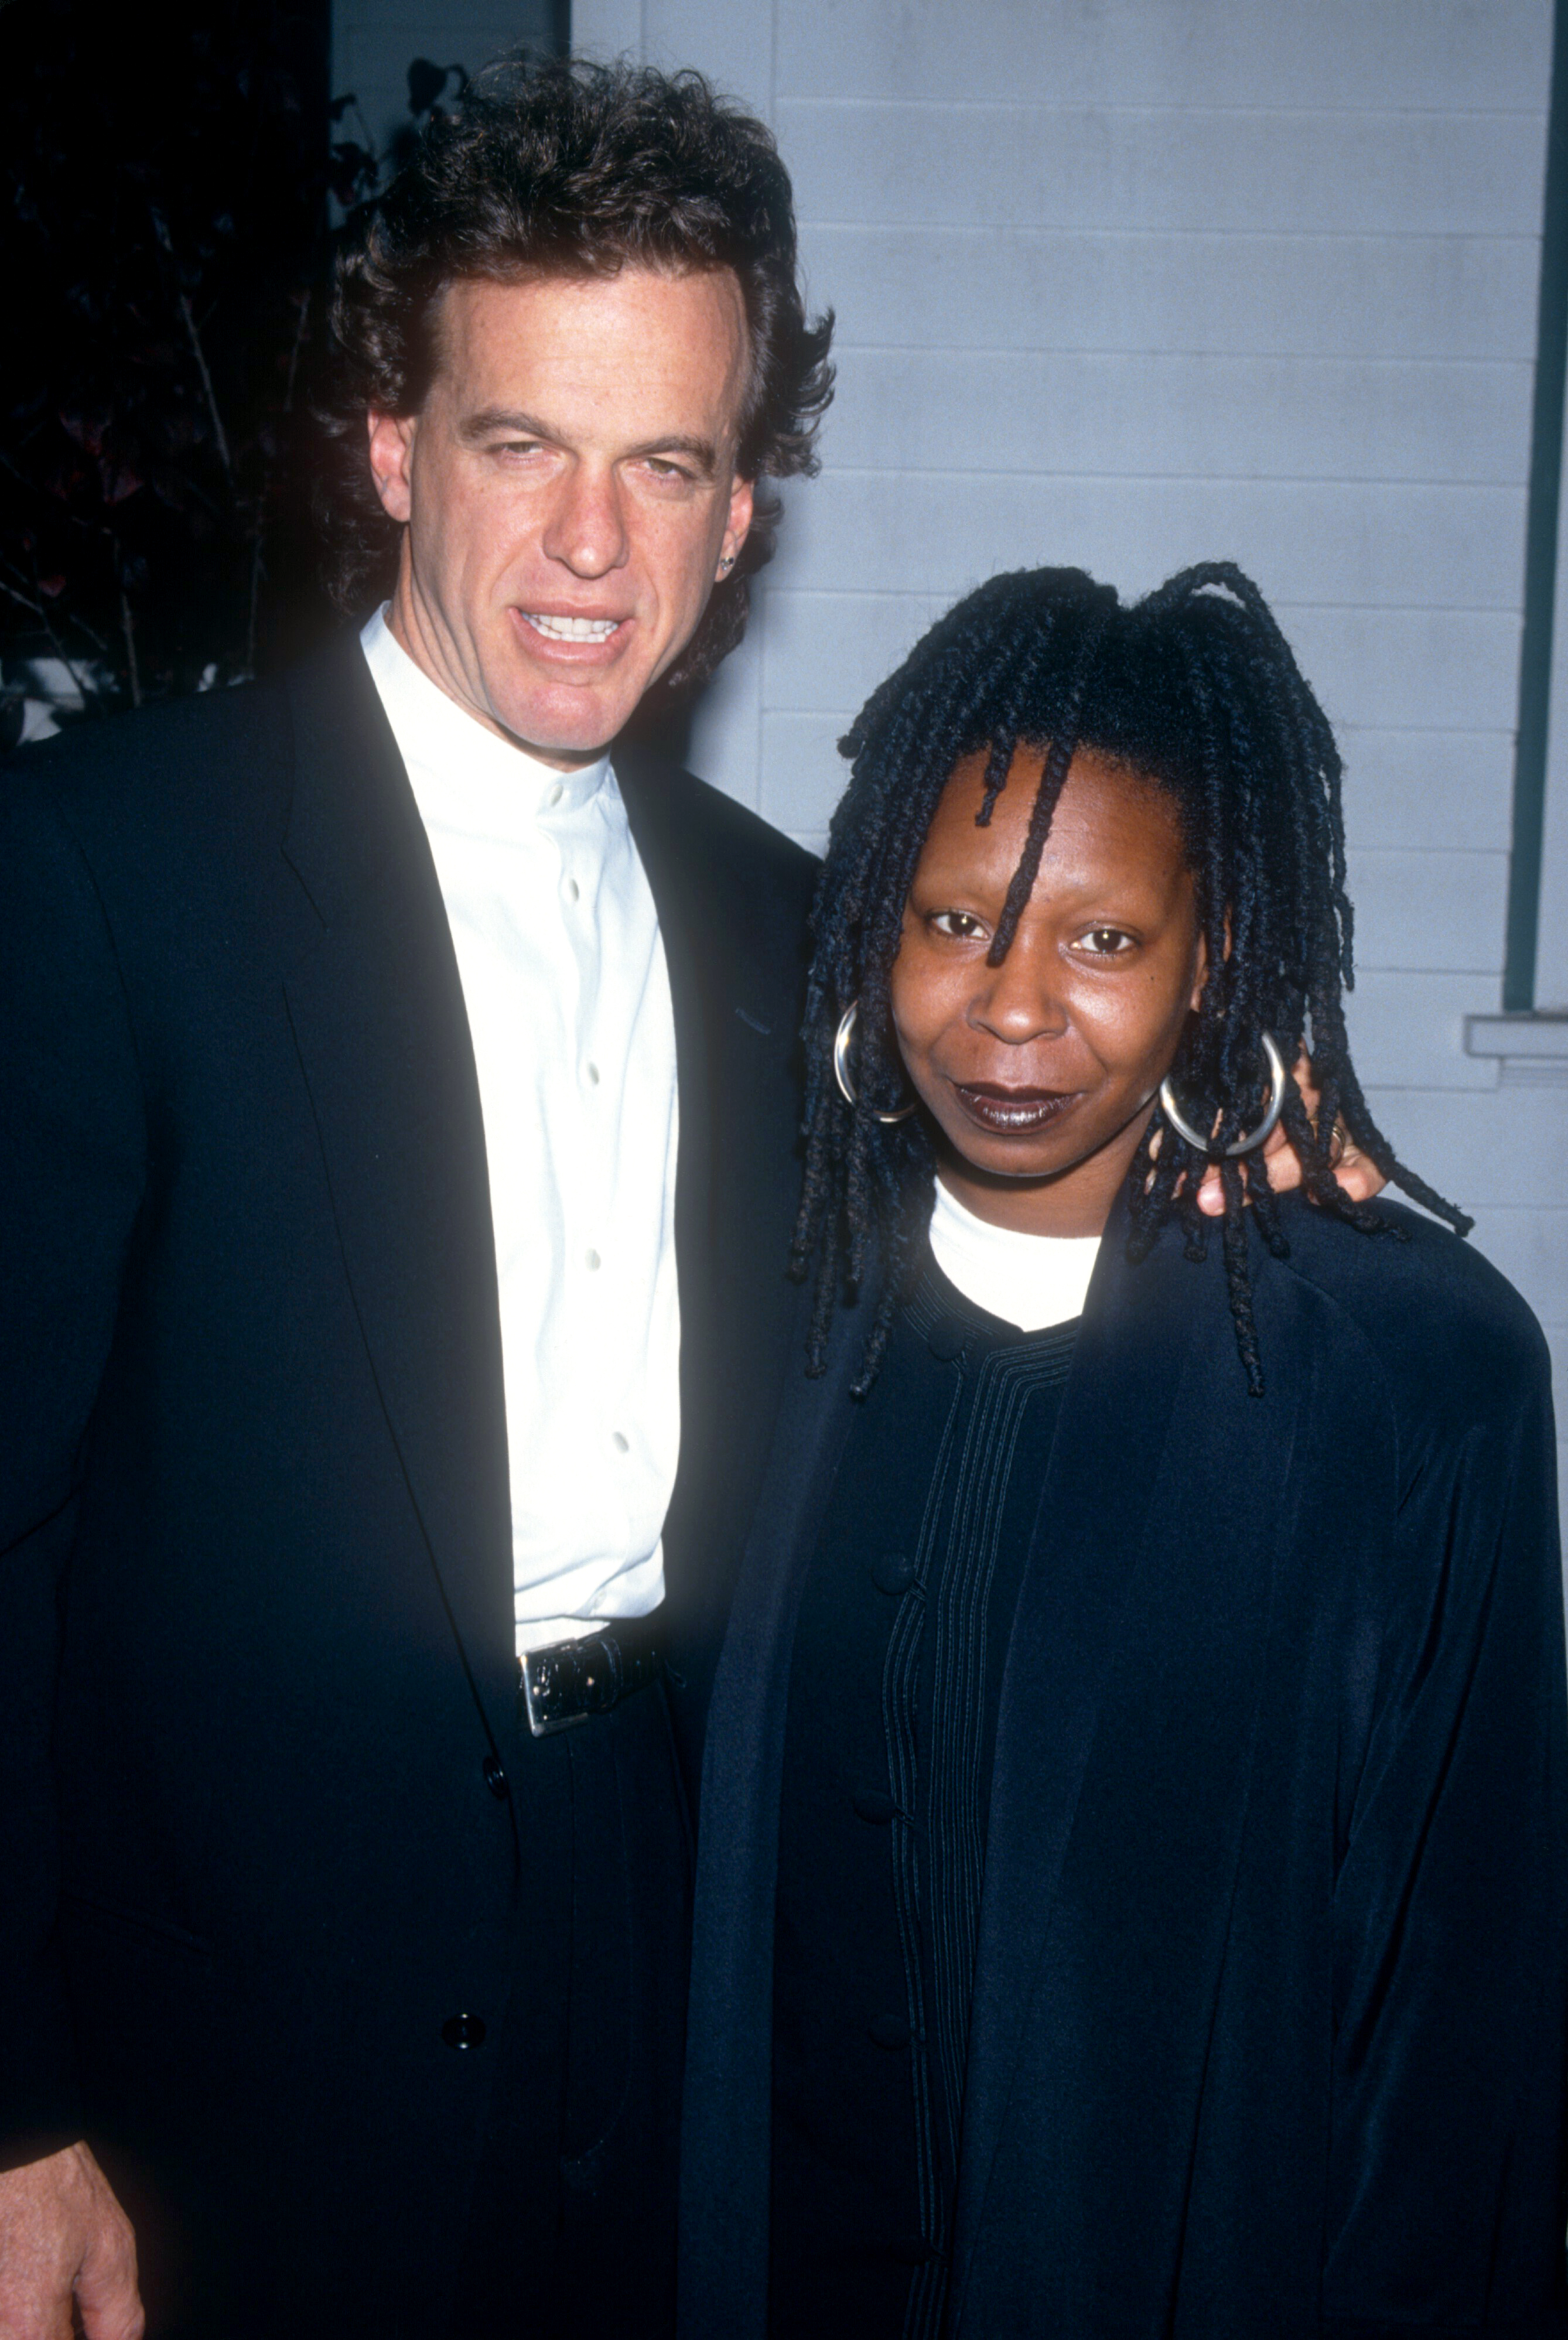 Lyle Trachtenberg and Whoopi Goldberg arrive for the Dream Street Foundation Award dinner on October 22, 1994, in Beverly Hills, California. | Source: Getty Images